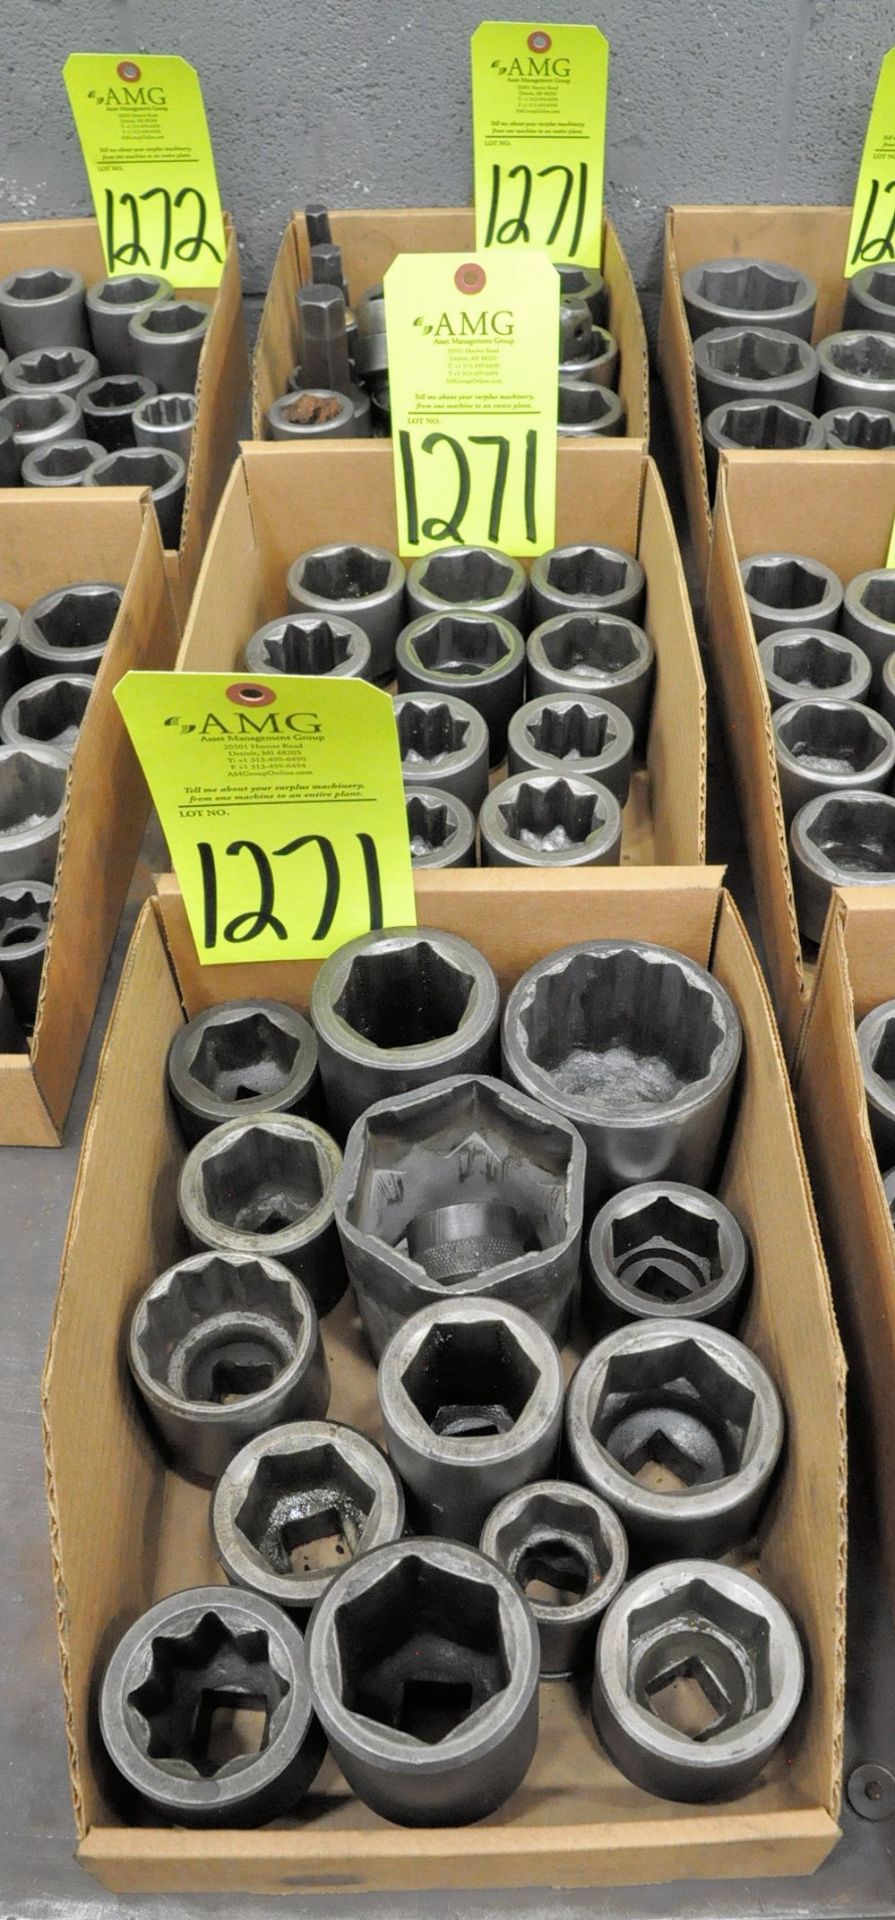 Lot-3/4" Drive Sockets in (3) Boxes, (G-17), (Yellow Tag)